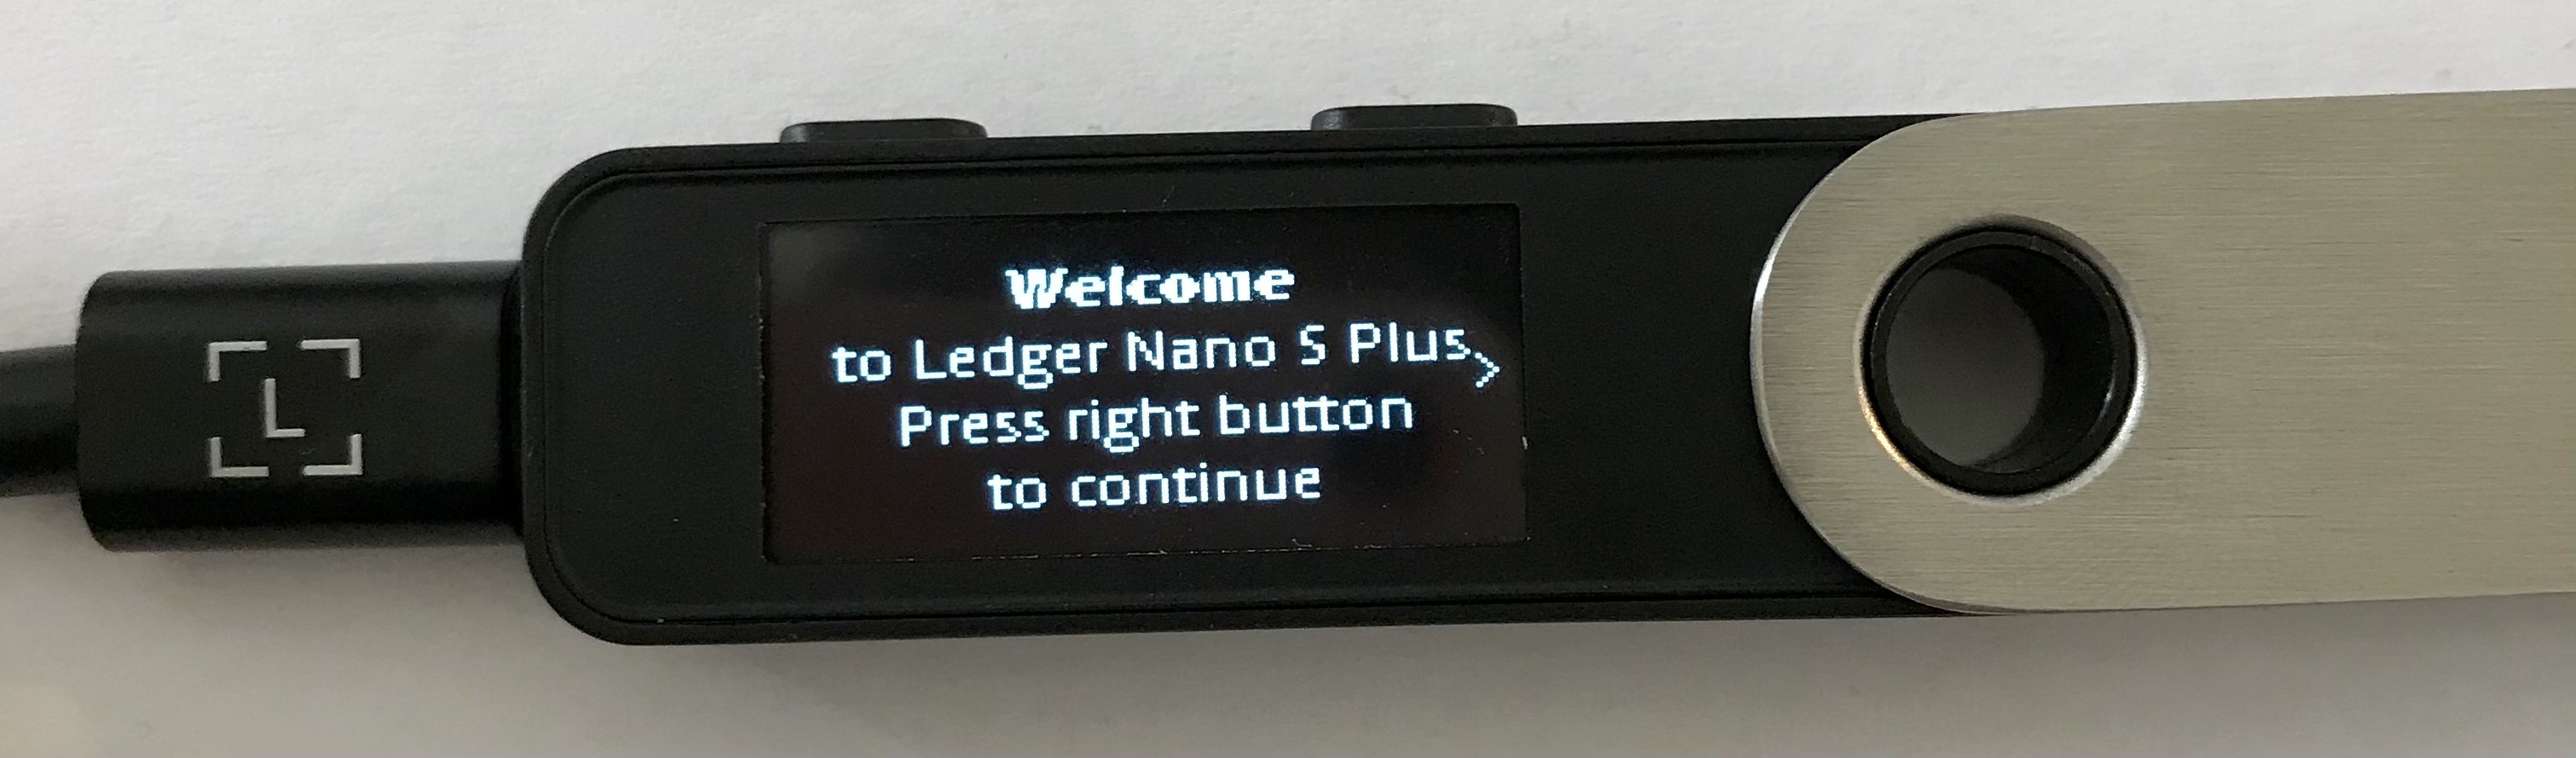 How to Migrate Your Crypto to a New Device? | Ledger